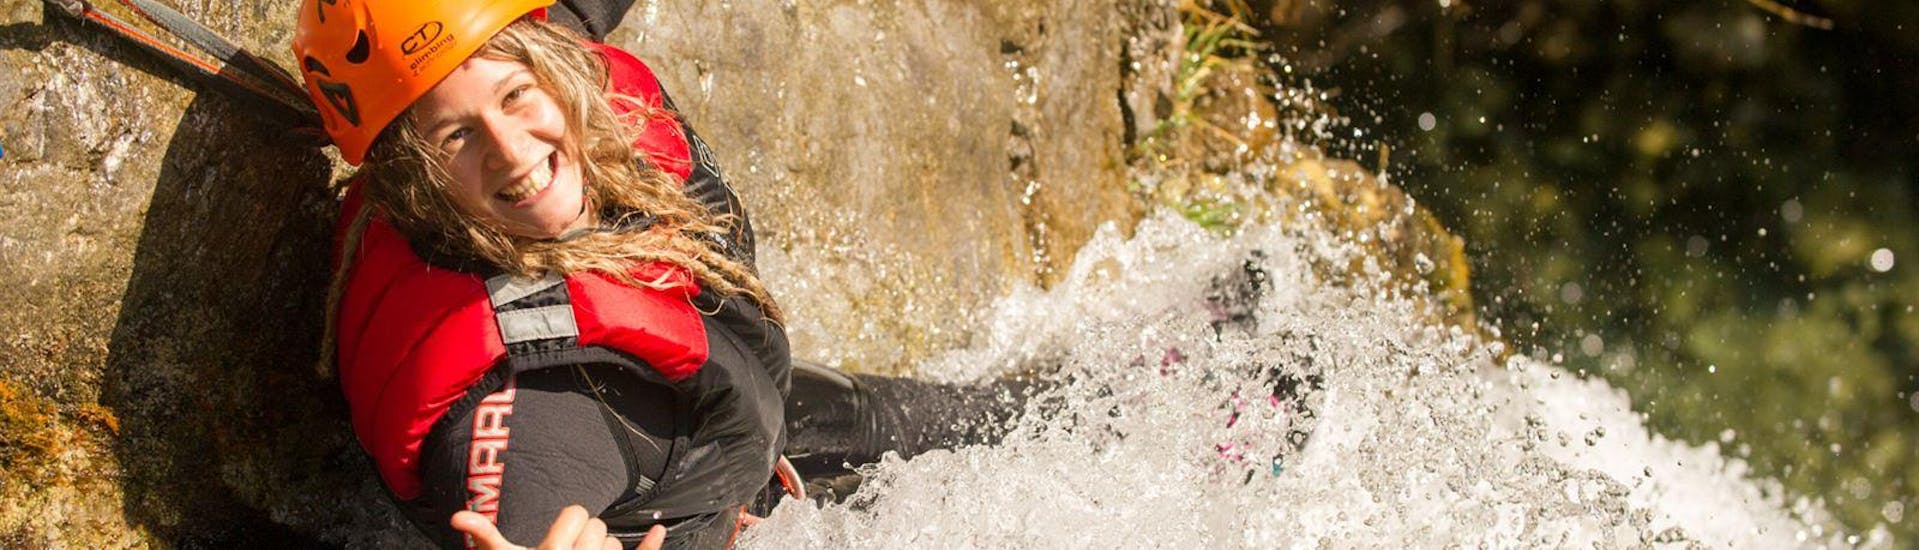 A girl smiles at the camera during the Canyoning Adventure in the Palvico from Arco at Lake Garda with Mmove - Into Nature Garda Lake.